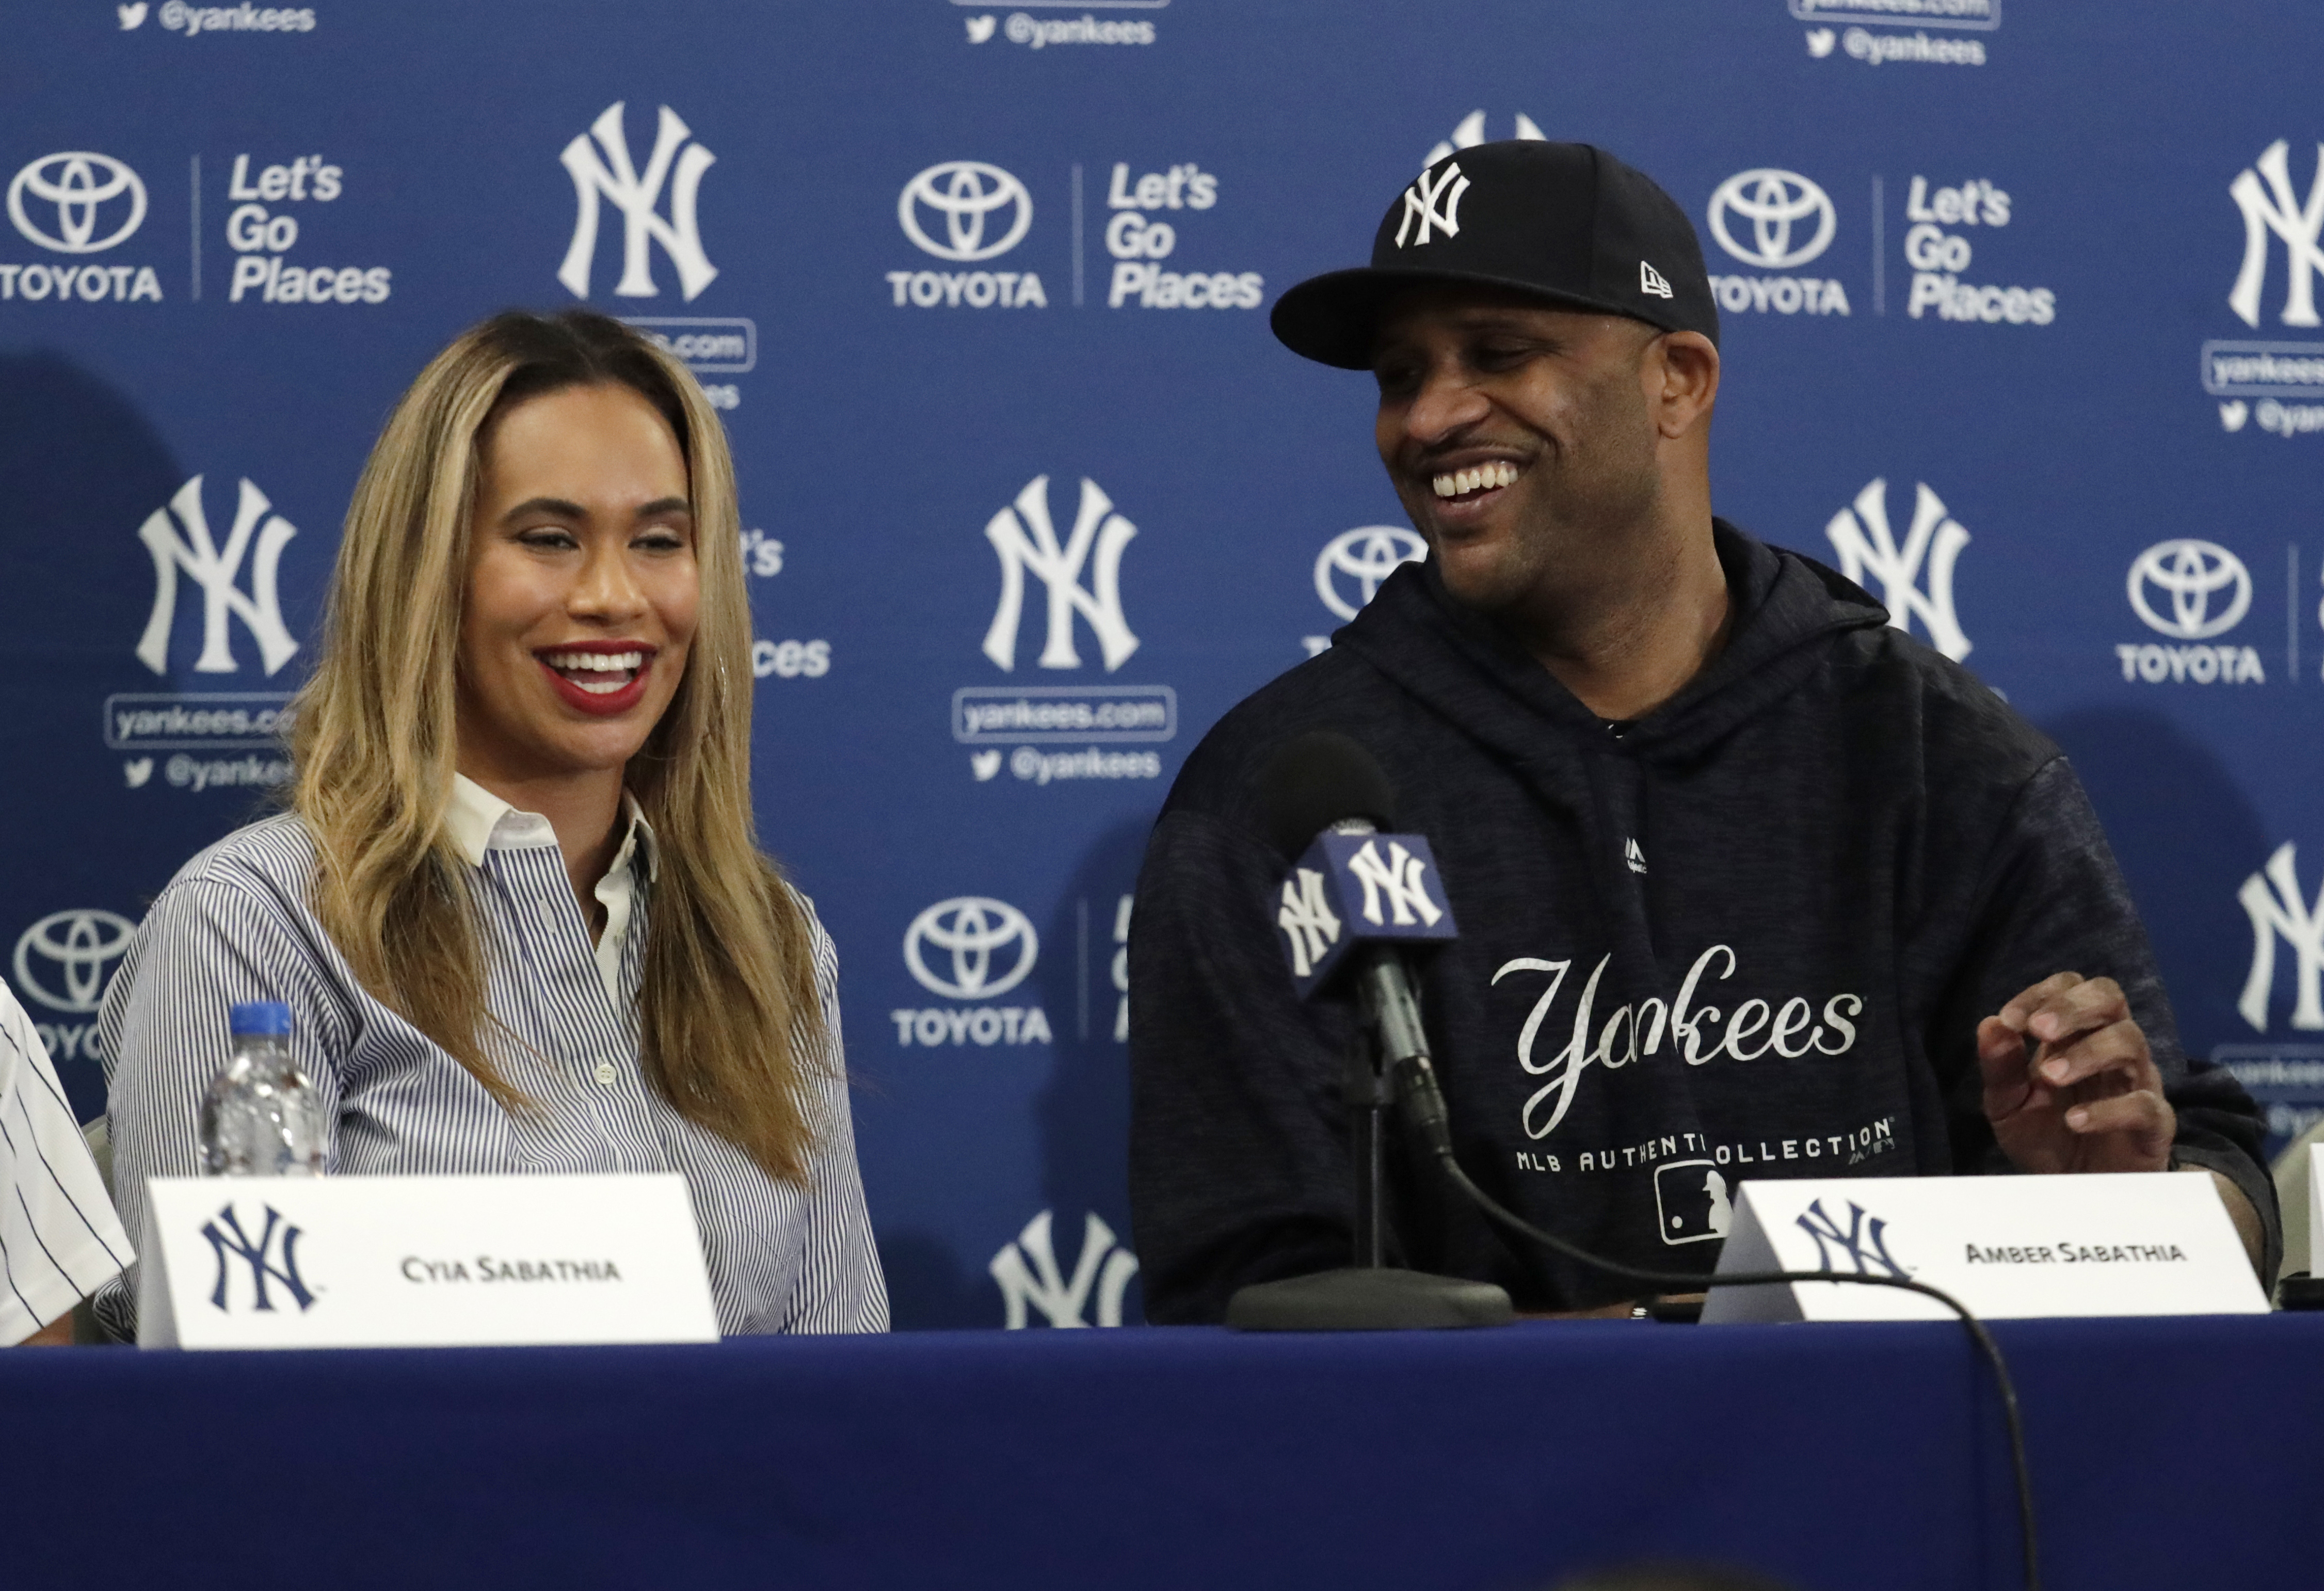 All in the family: Ex-Yankees ace CC Sabathia's wife steps to the plate as  MLB agent 